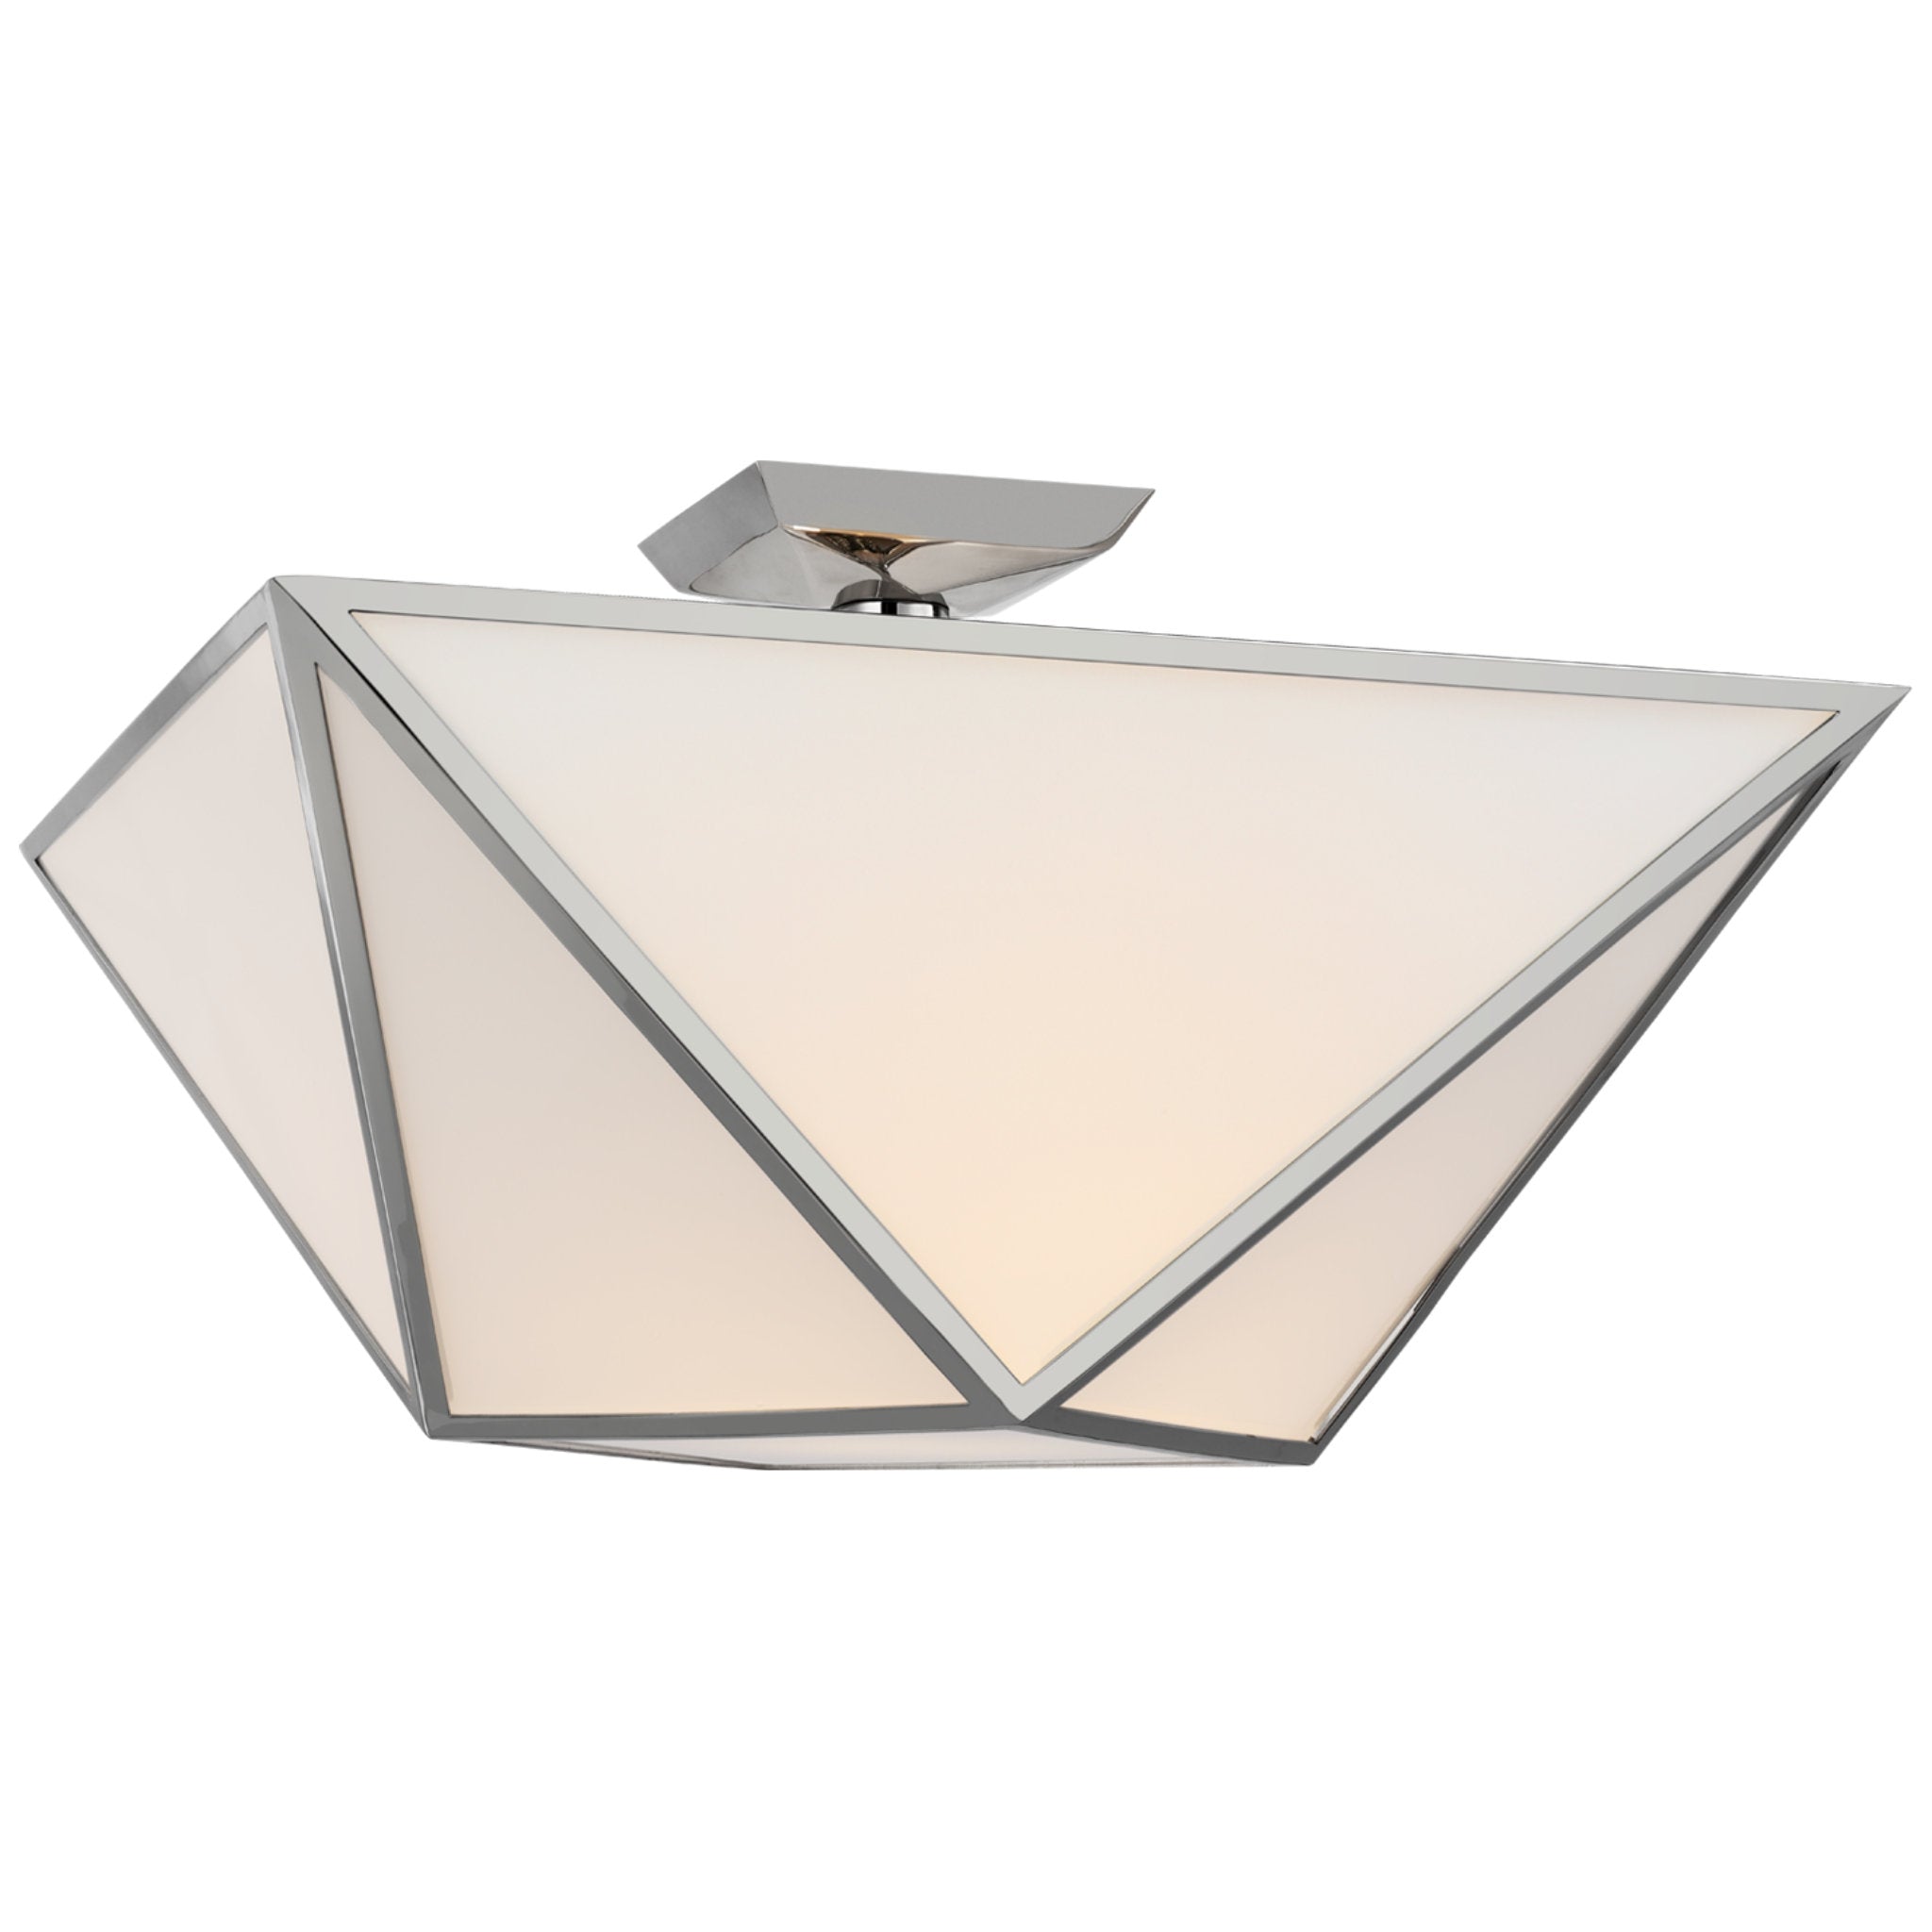 Julie Neill Lorino Large Semi-Flush Mount in Polished Nickel with White Glass